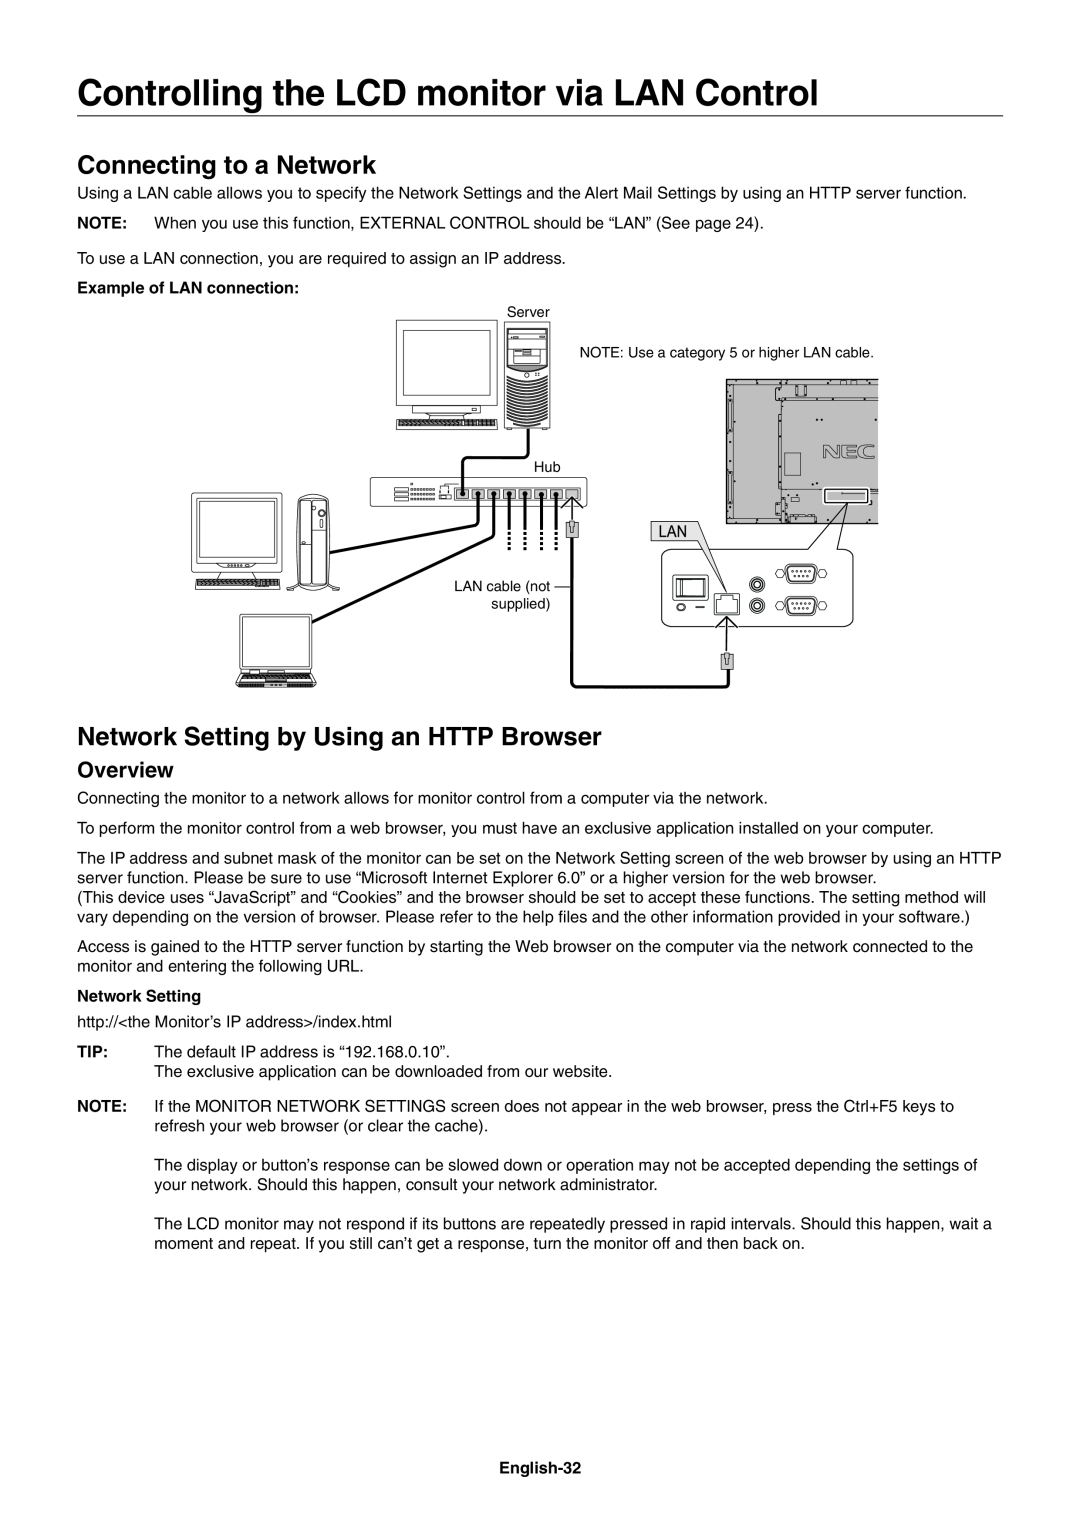 NEC V651 Controlling the LCD monitor via LAN Control, Connecting to a Network, Network Setting by Using an HTTP Browser 